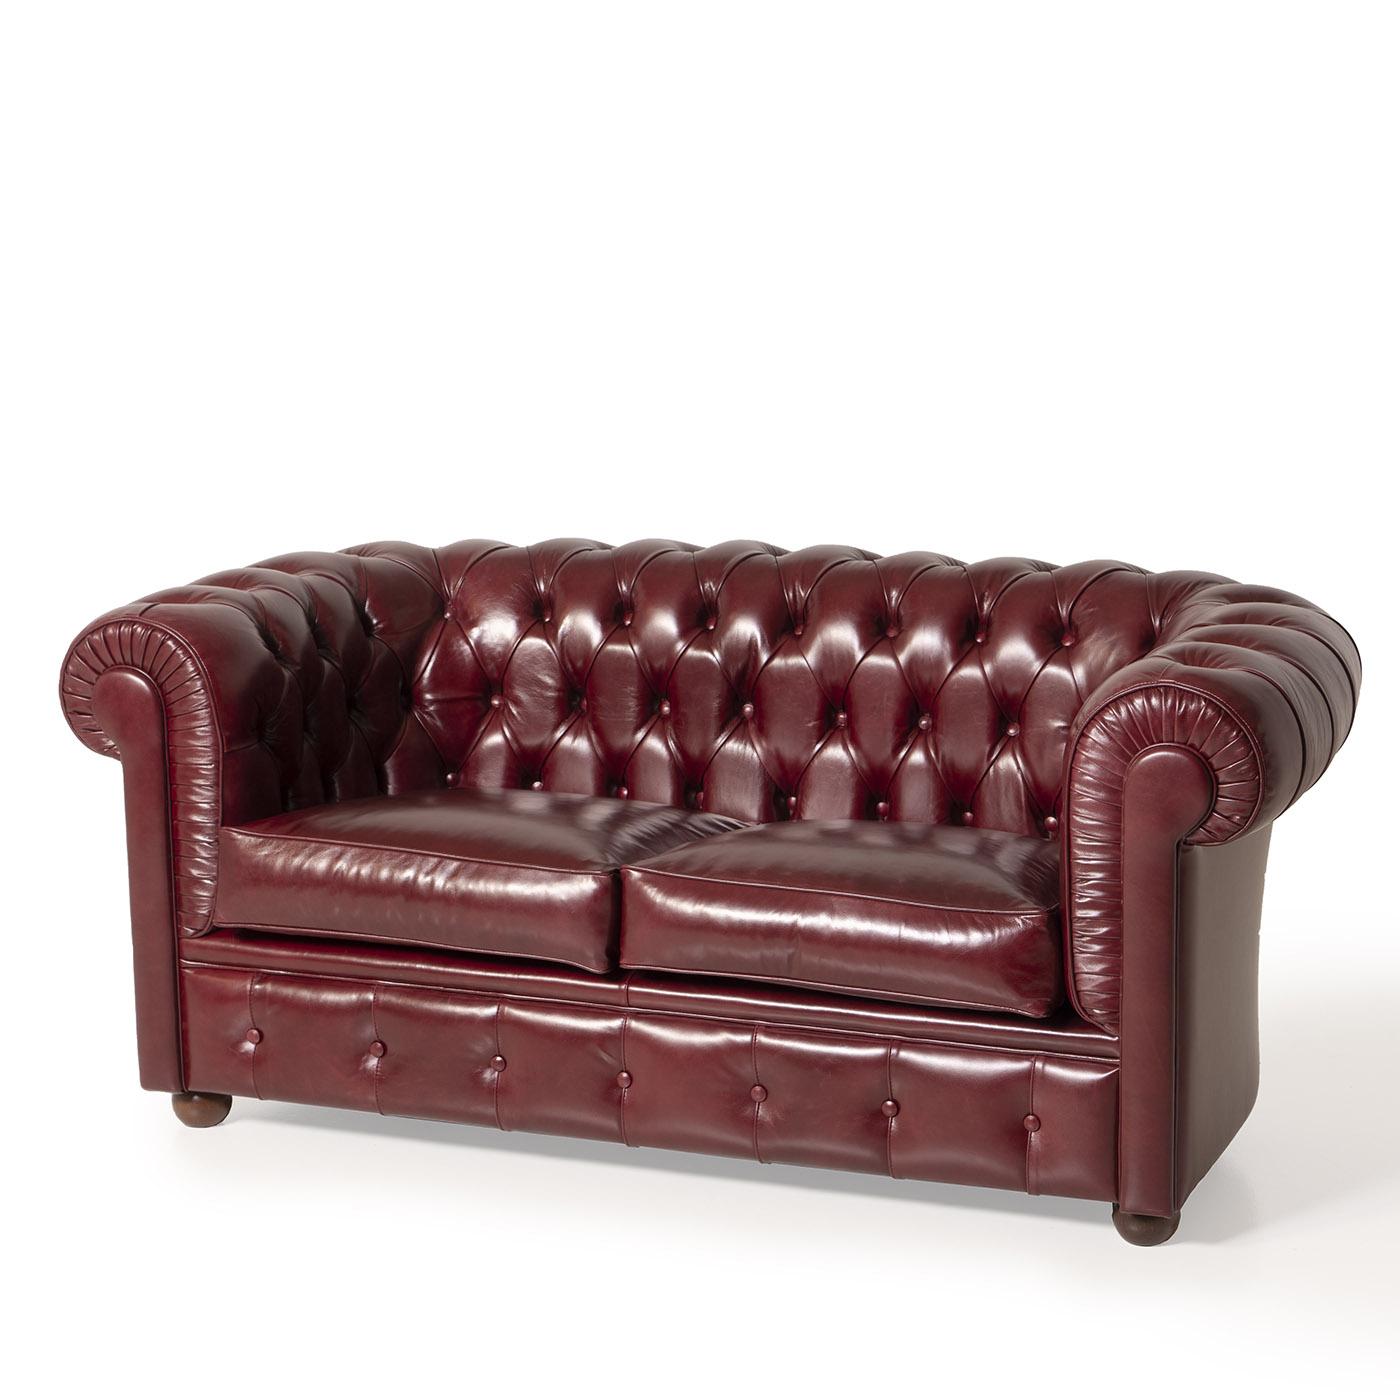 Contemporary Chesterfield Bordeaux Leather Sofa